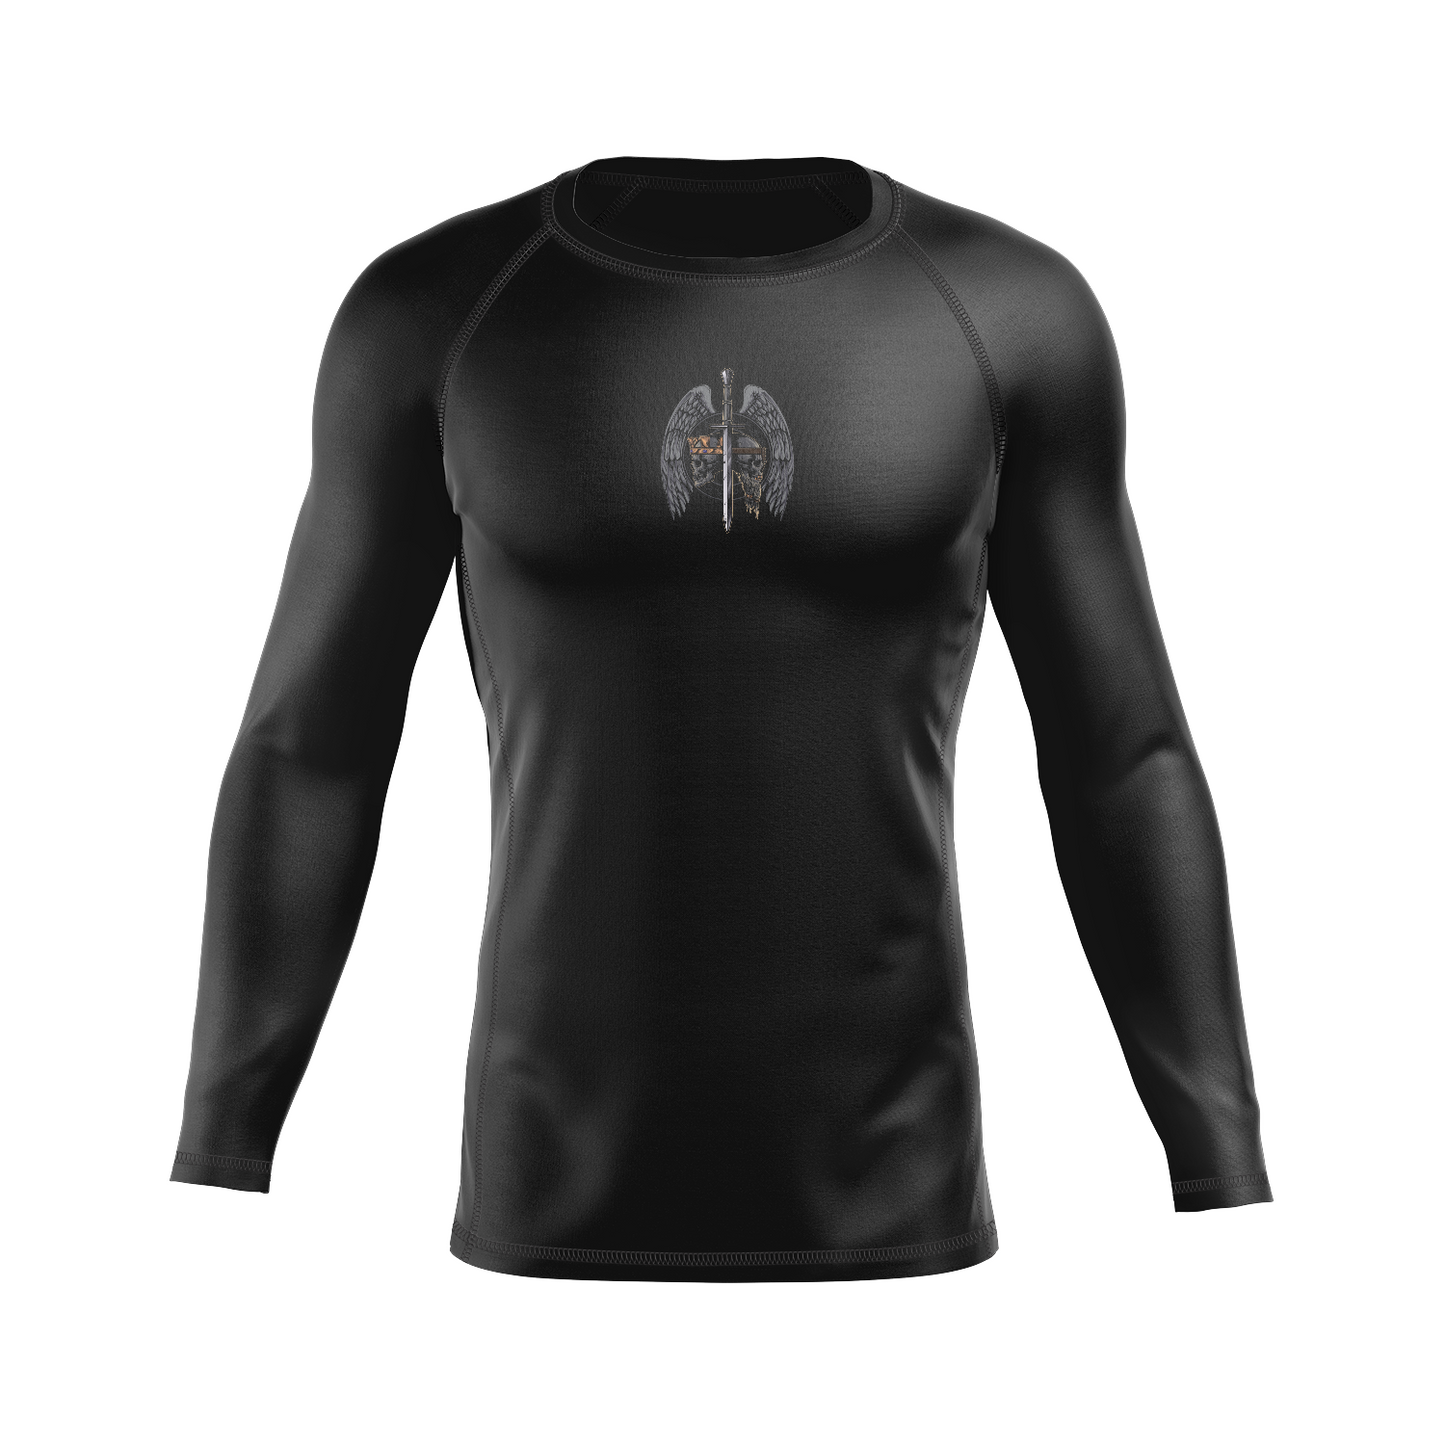 Deeds of Arms men's rash guard Kings and Commoners, black